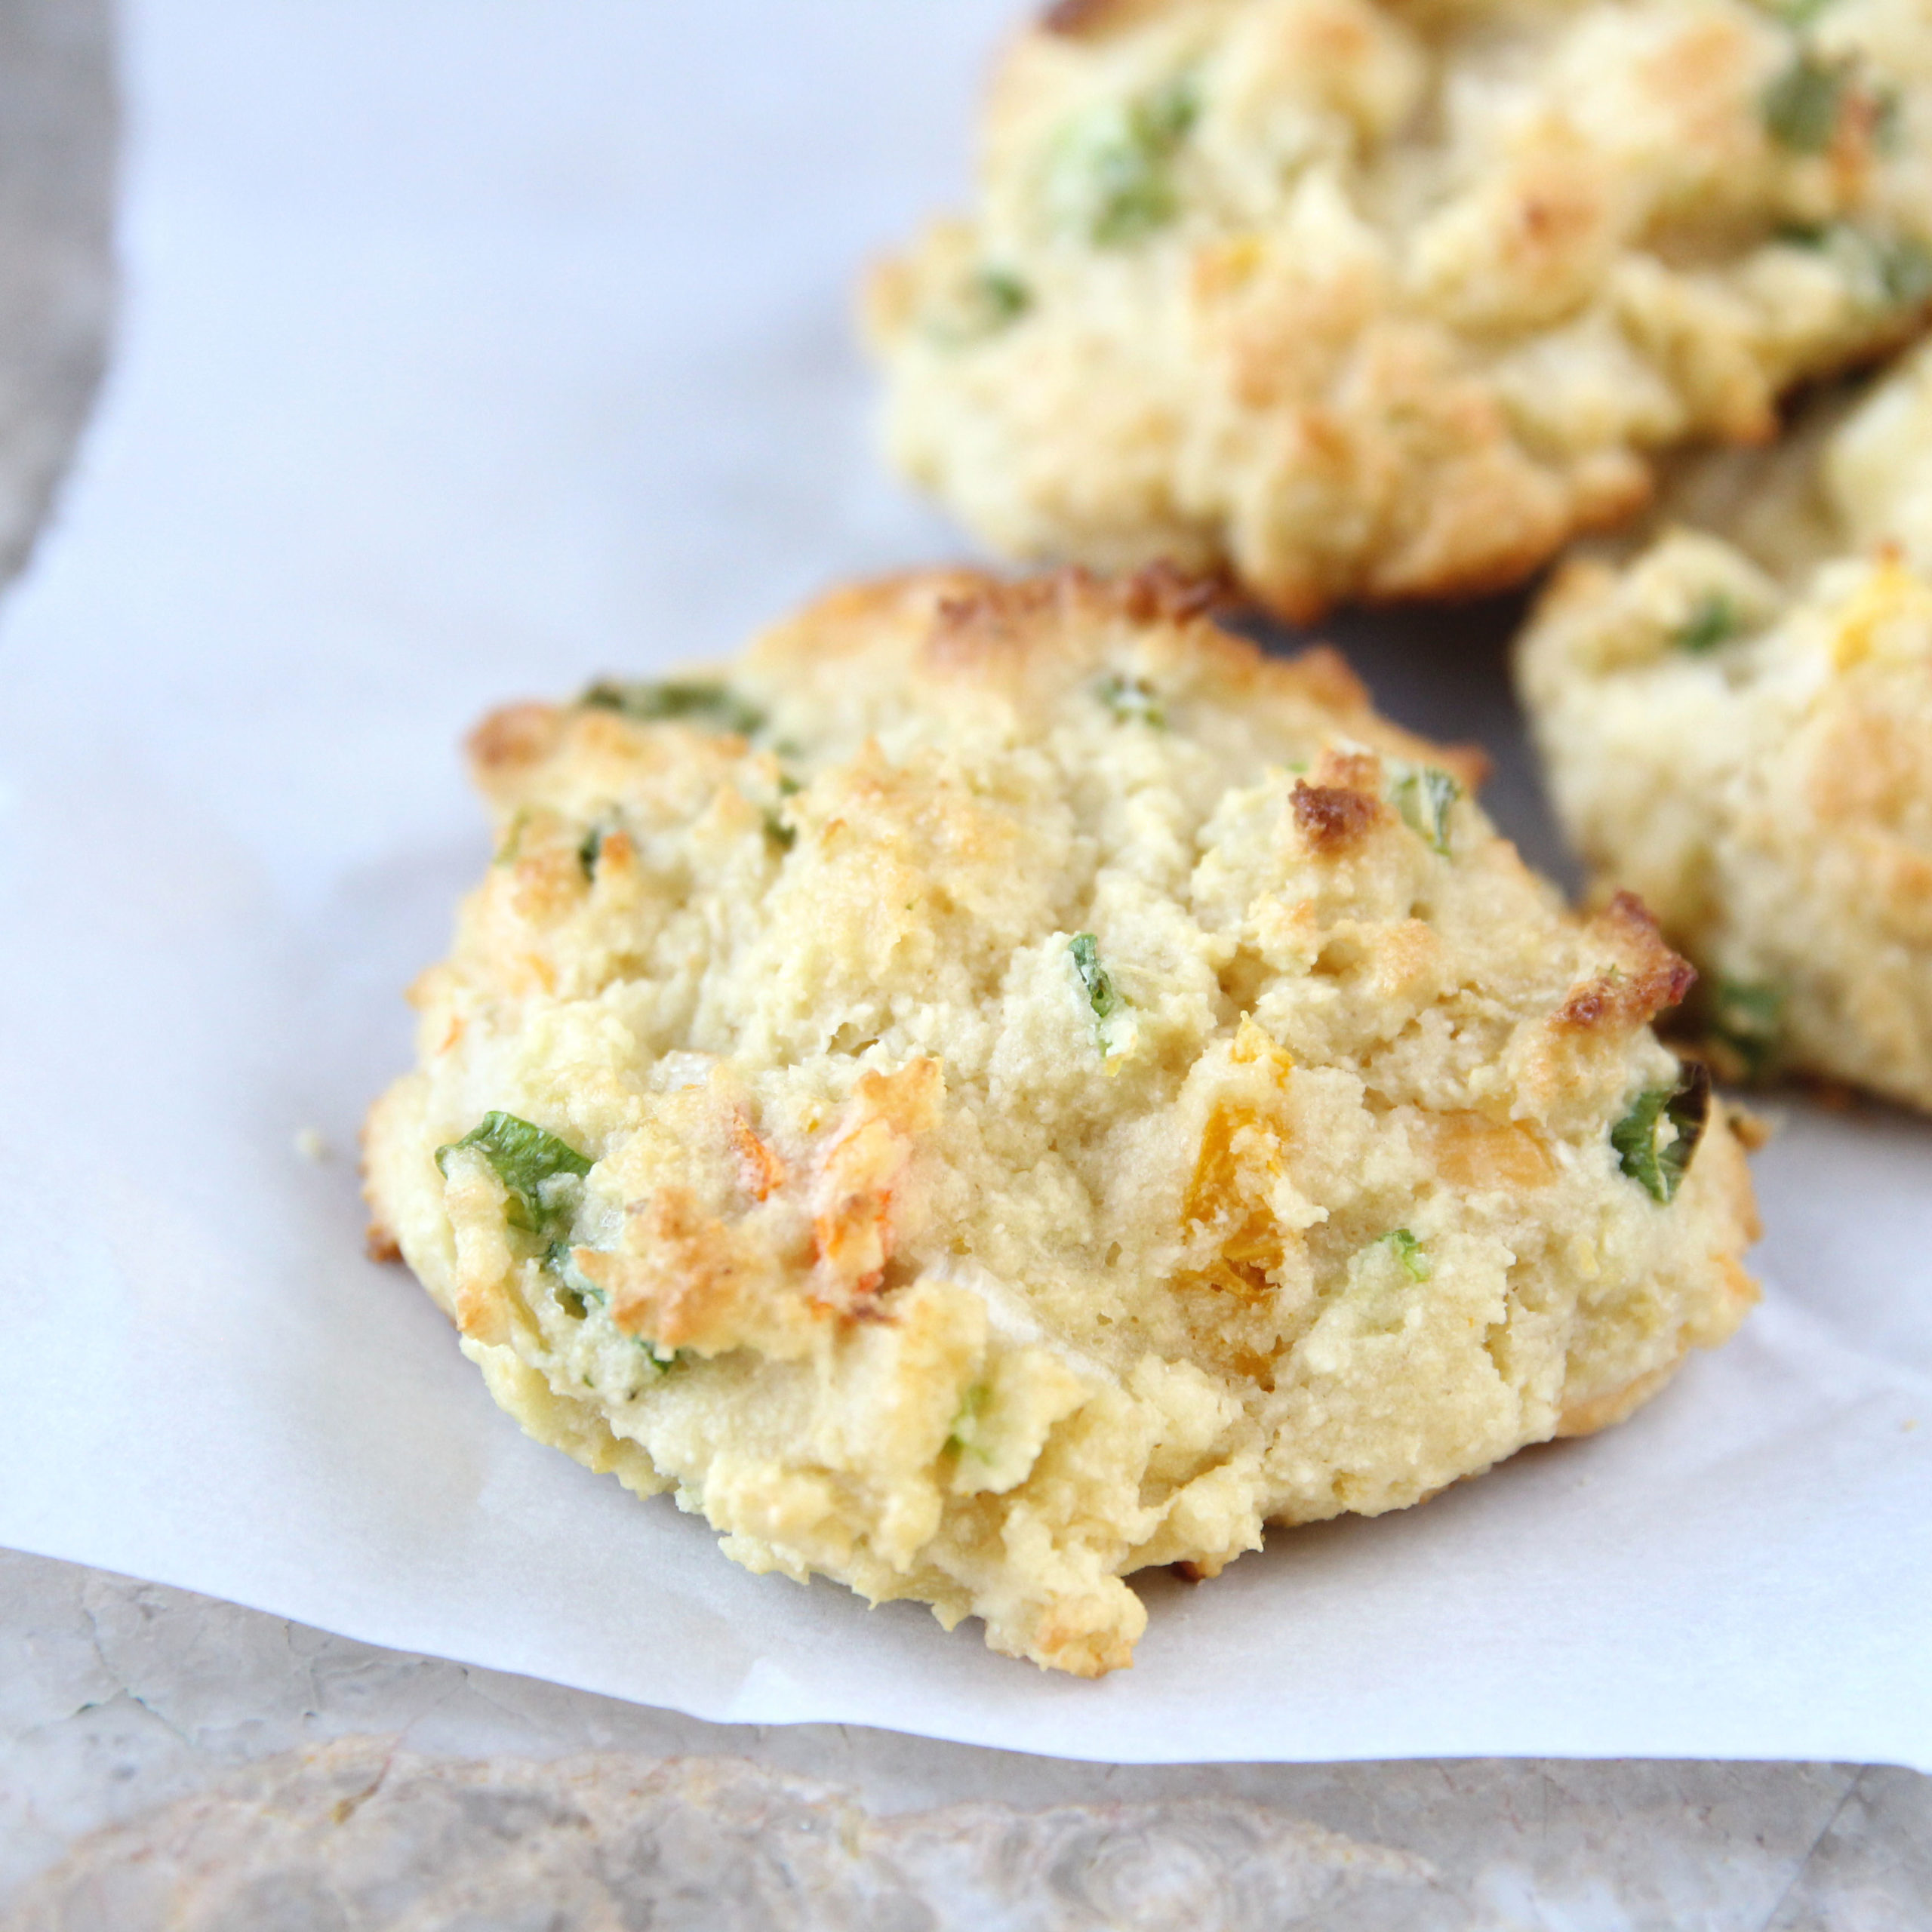 How to Make Gluten-Free Cheddar Drop Biscuits made with Cauliflower - Flatbread Pizza Ideas